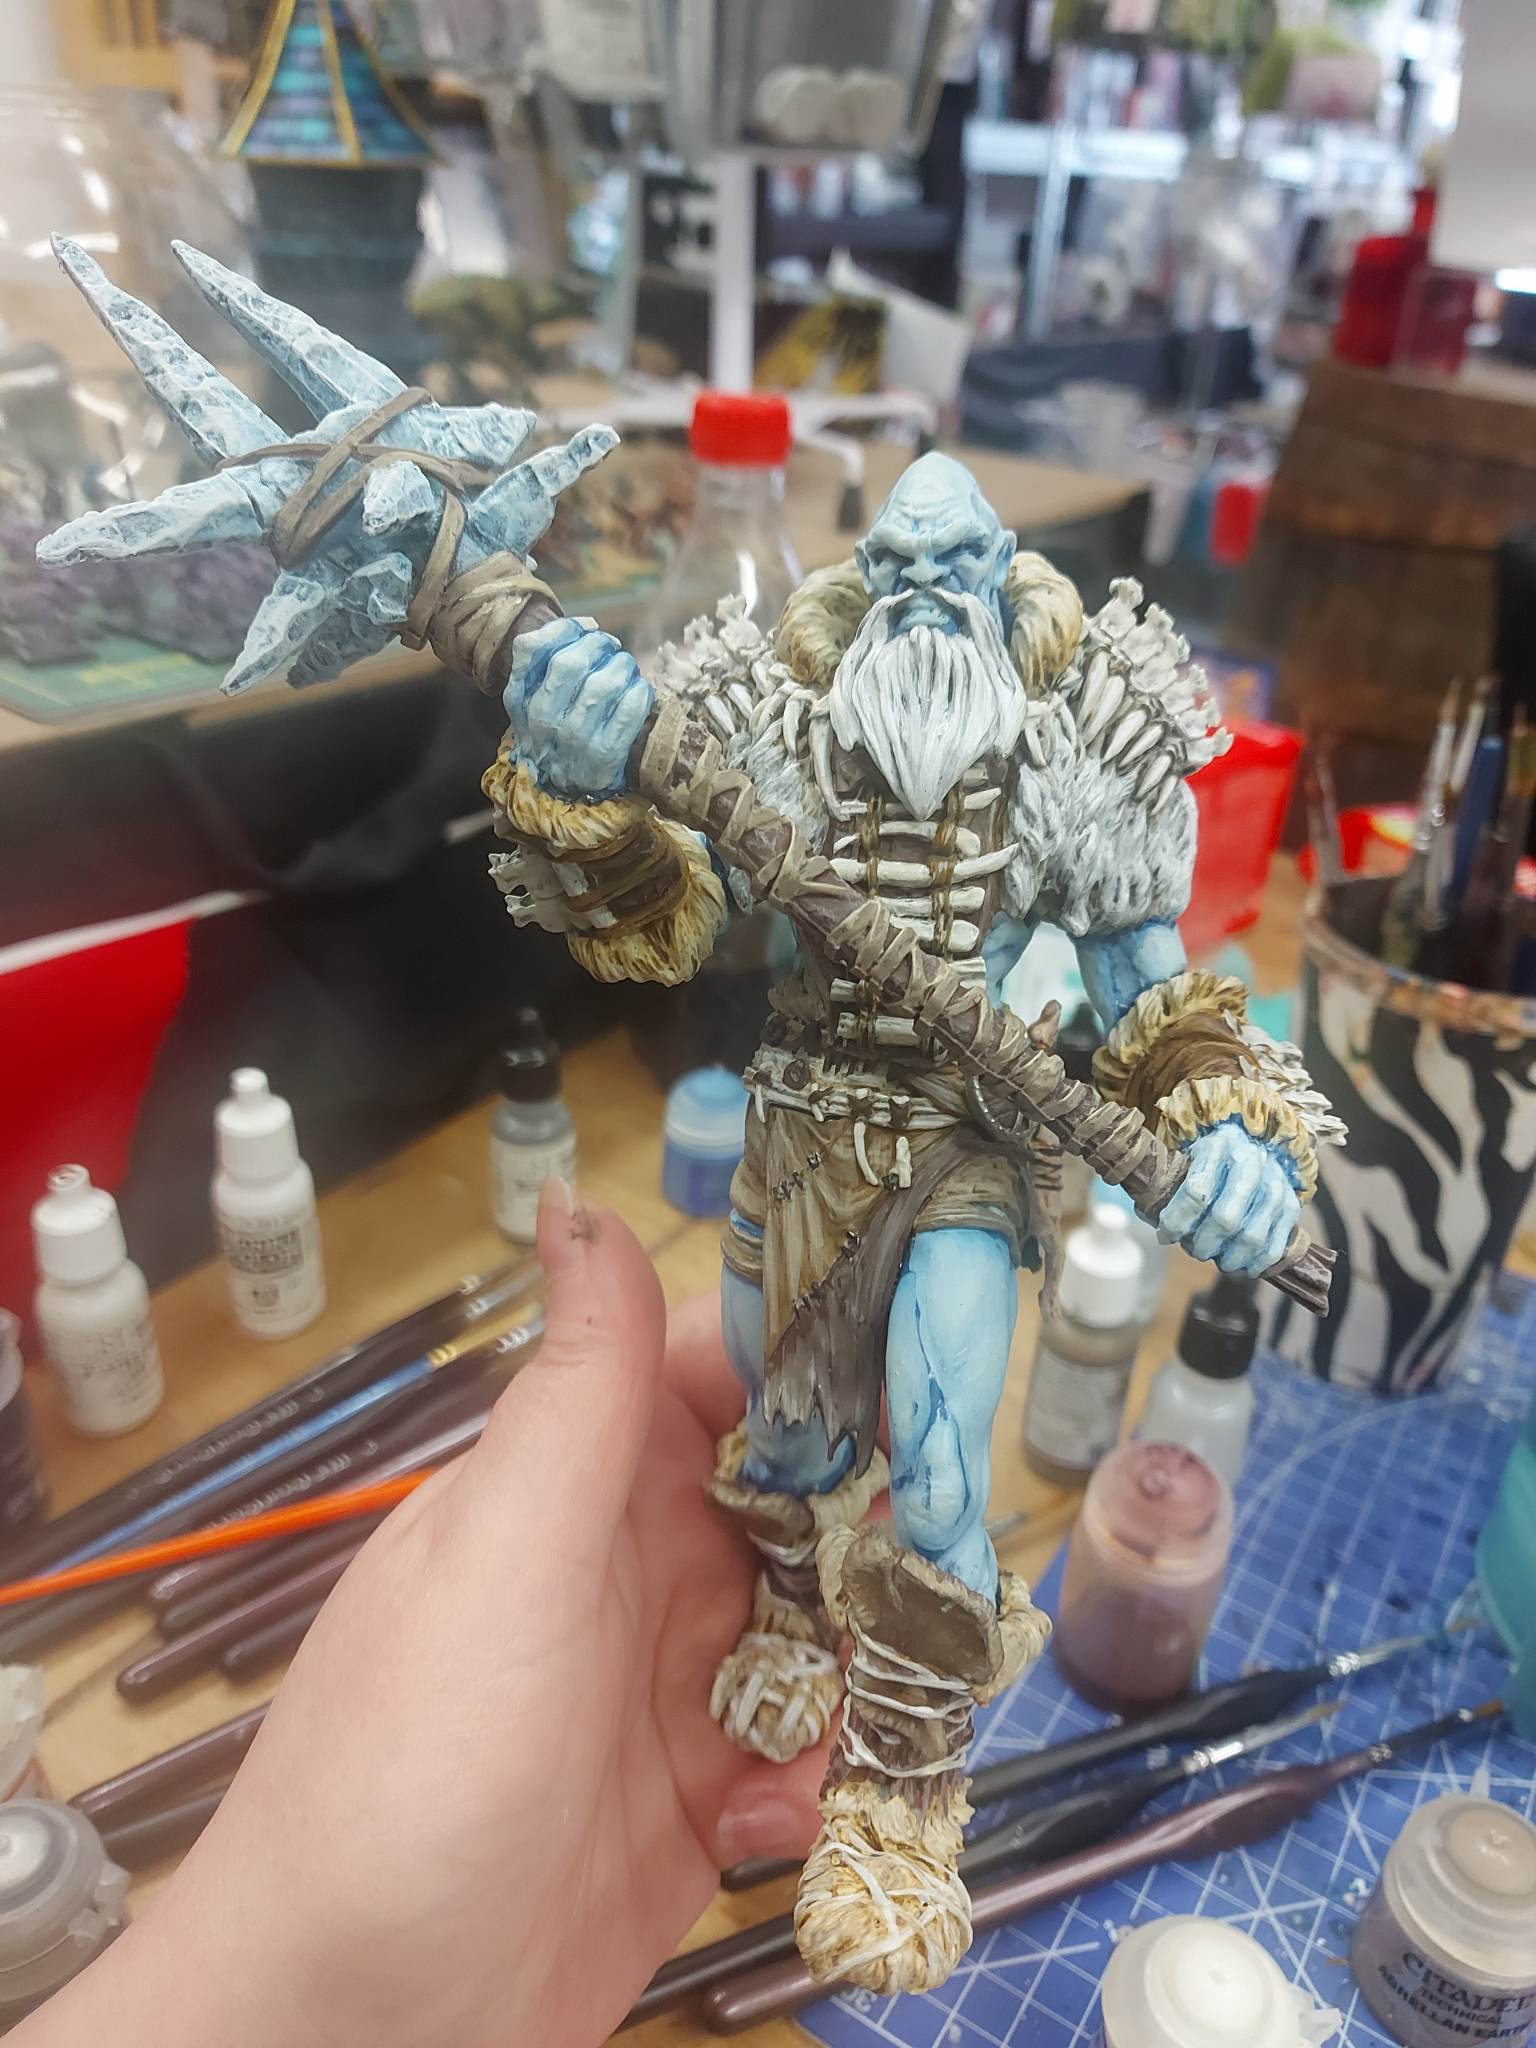 Frost Giant #1 by Bexx